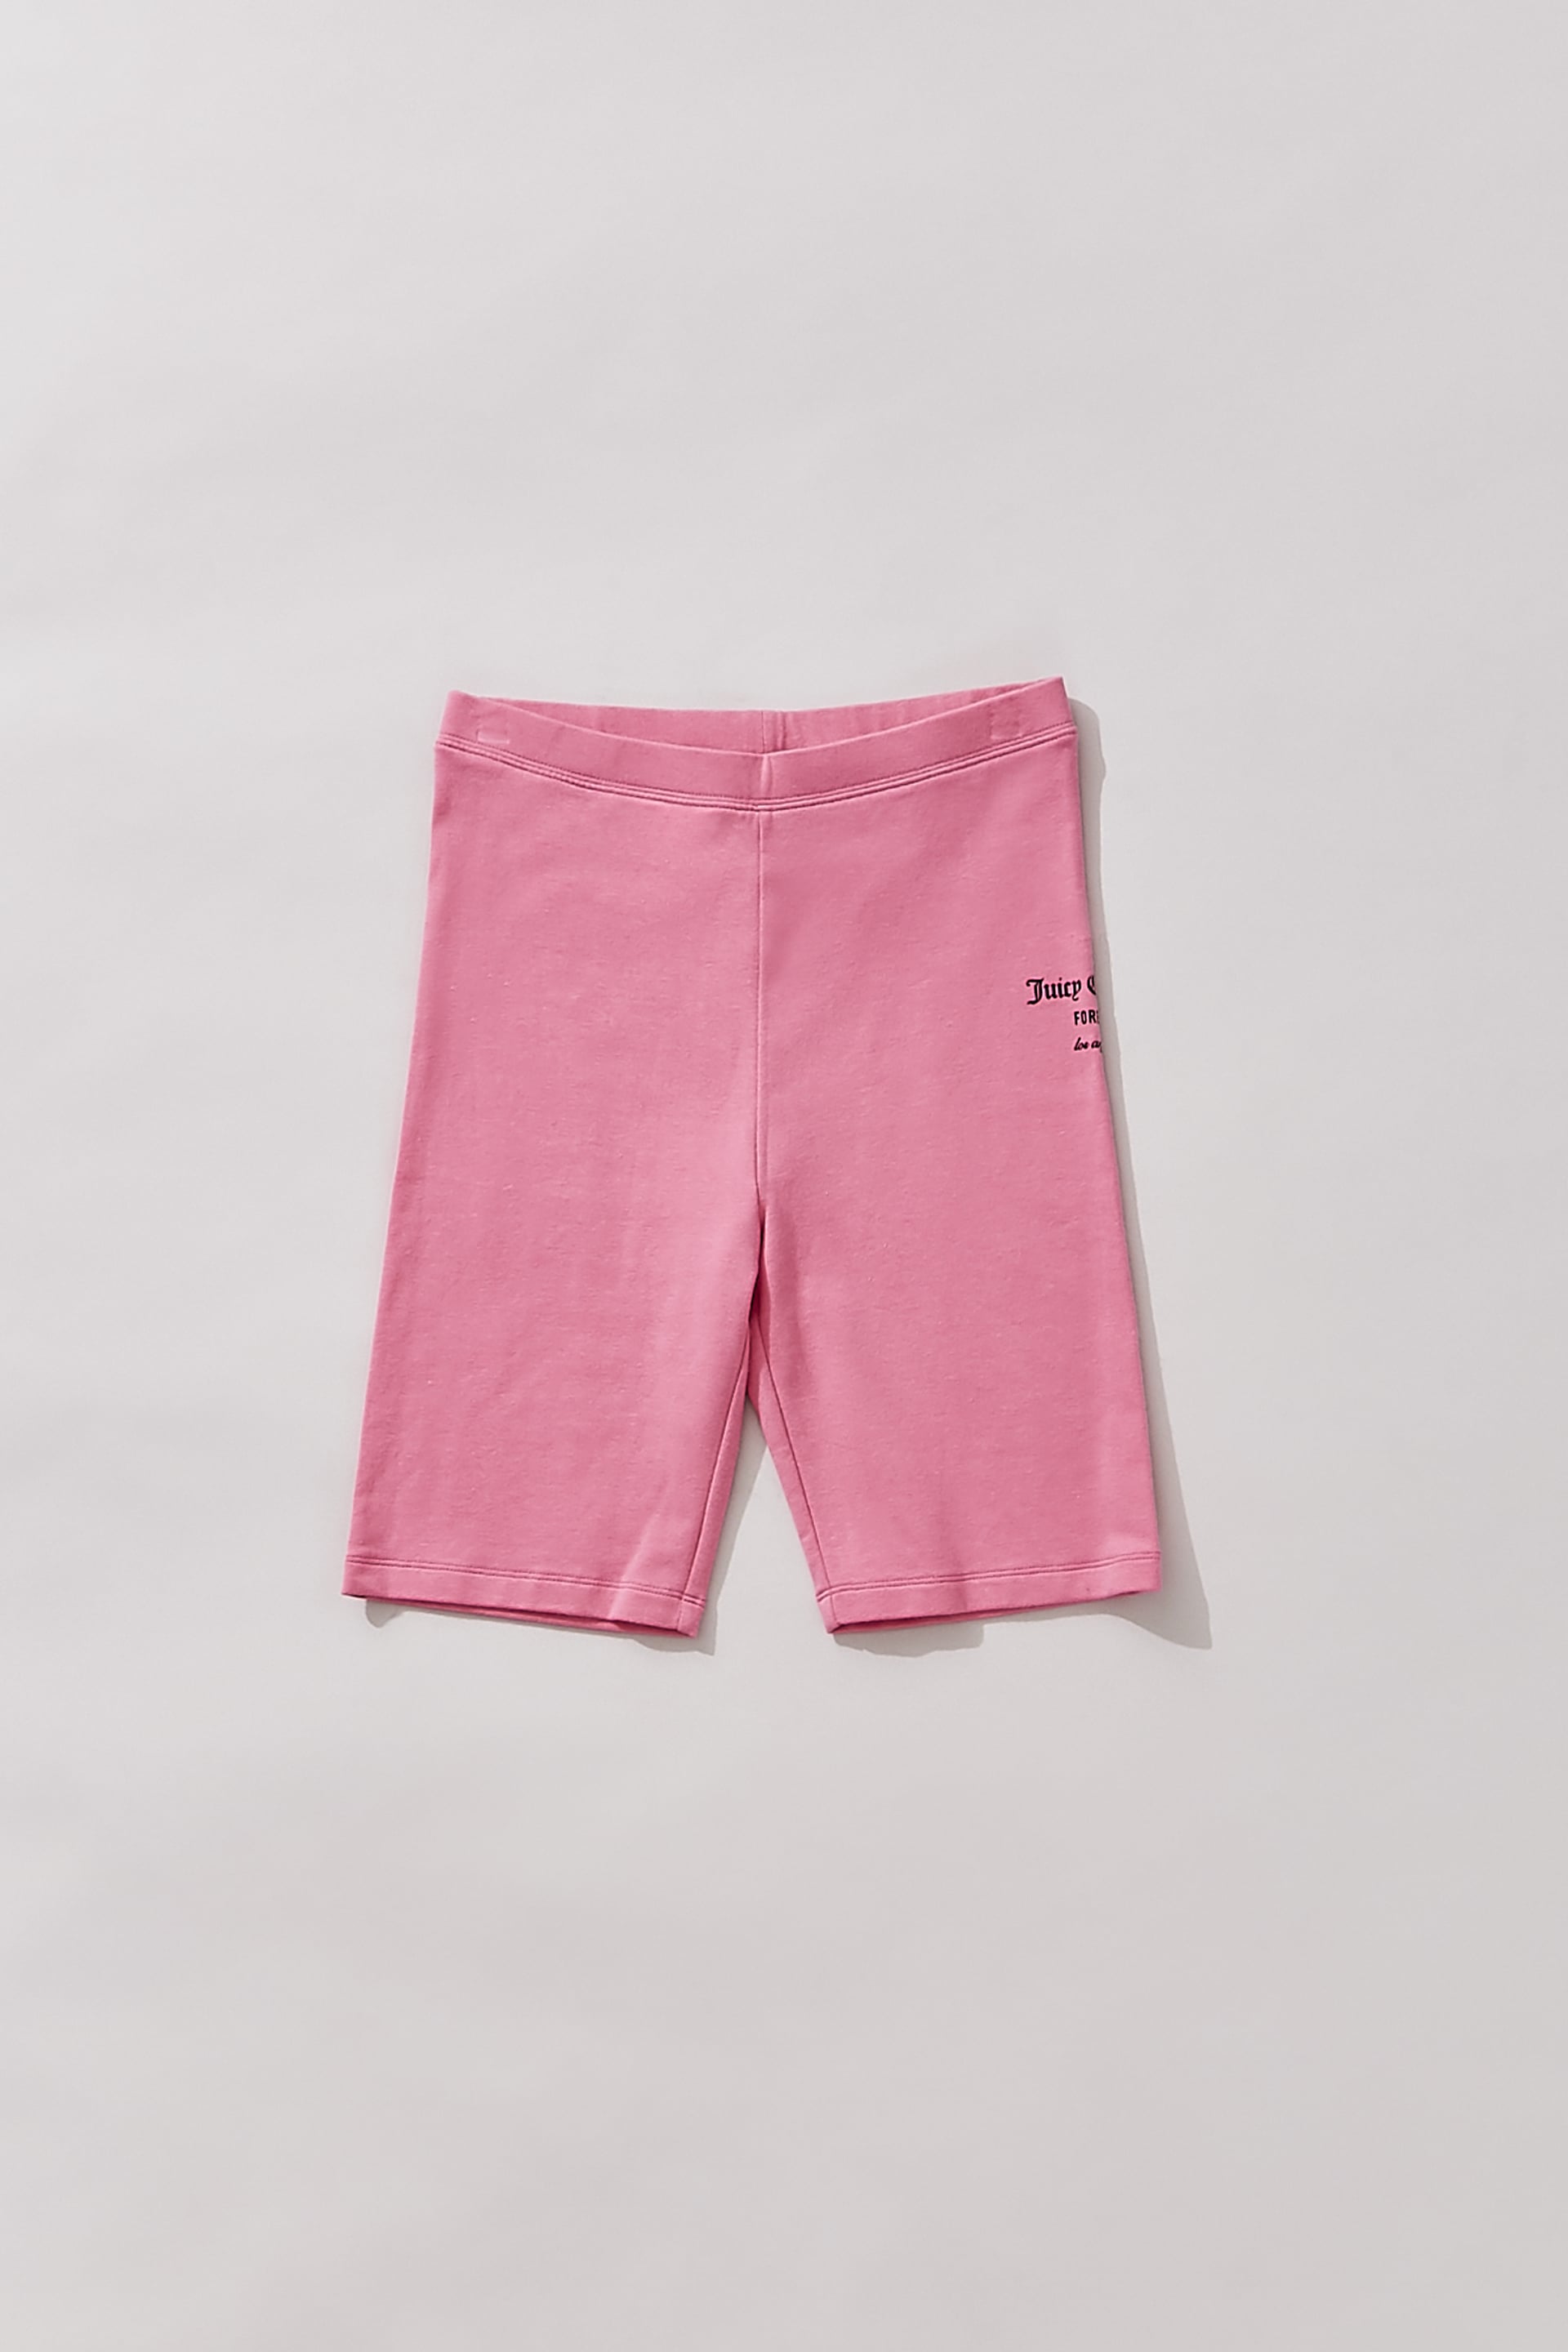 Juicy Couture X Forever 21 Pink Plus Size Cotton Blend Bike Shorts. Size 3X